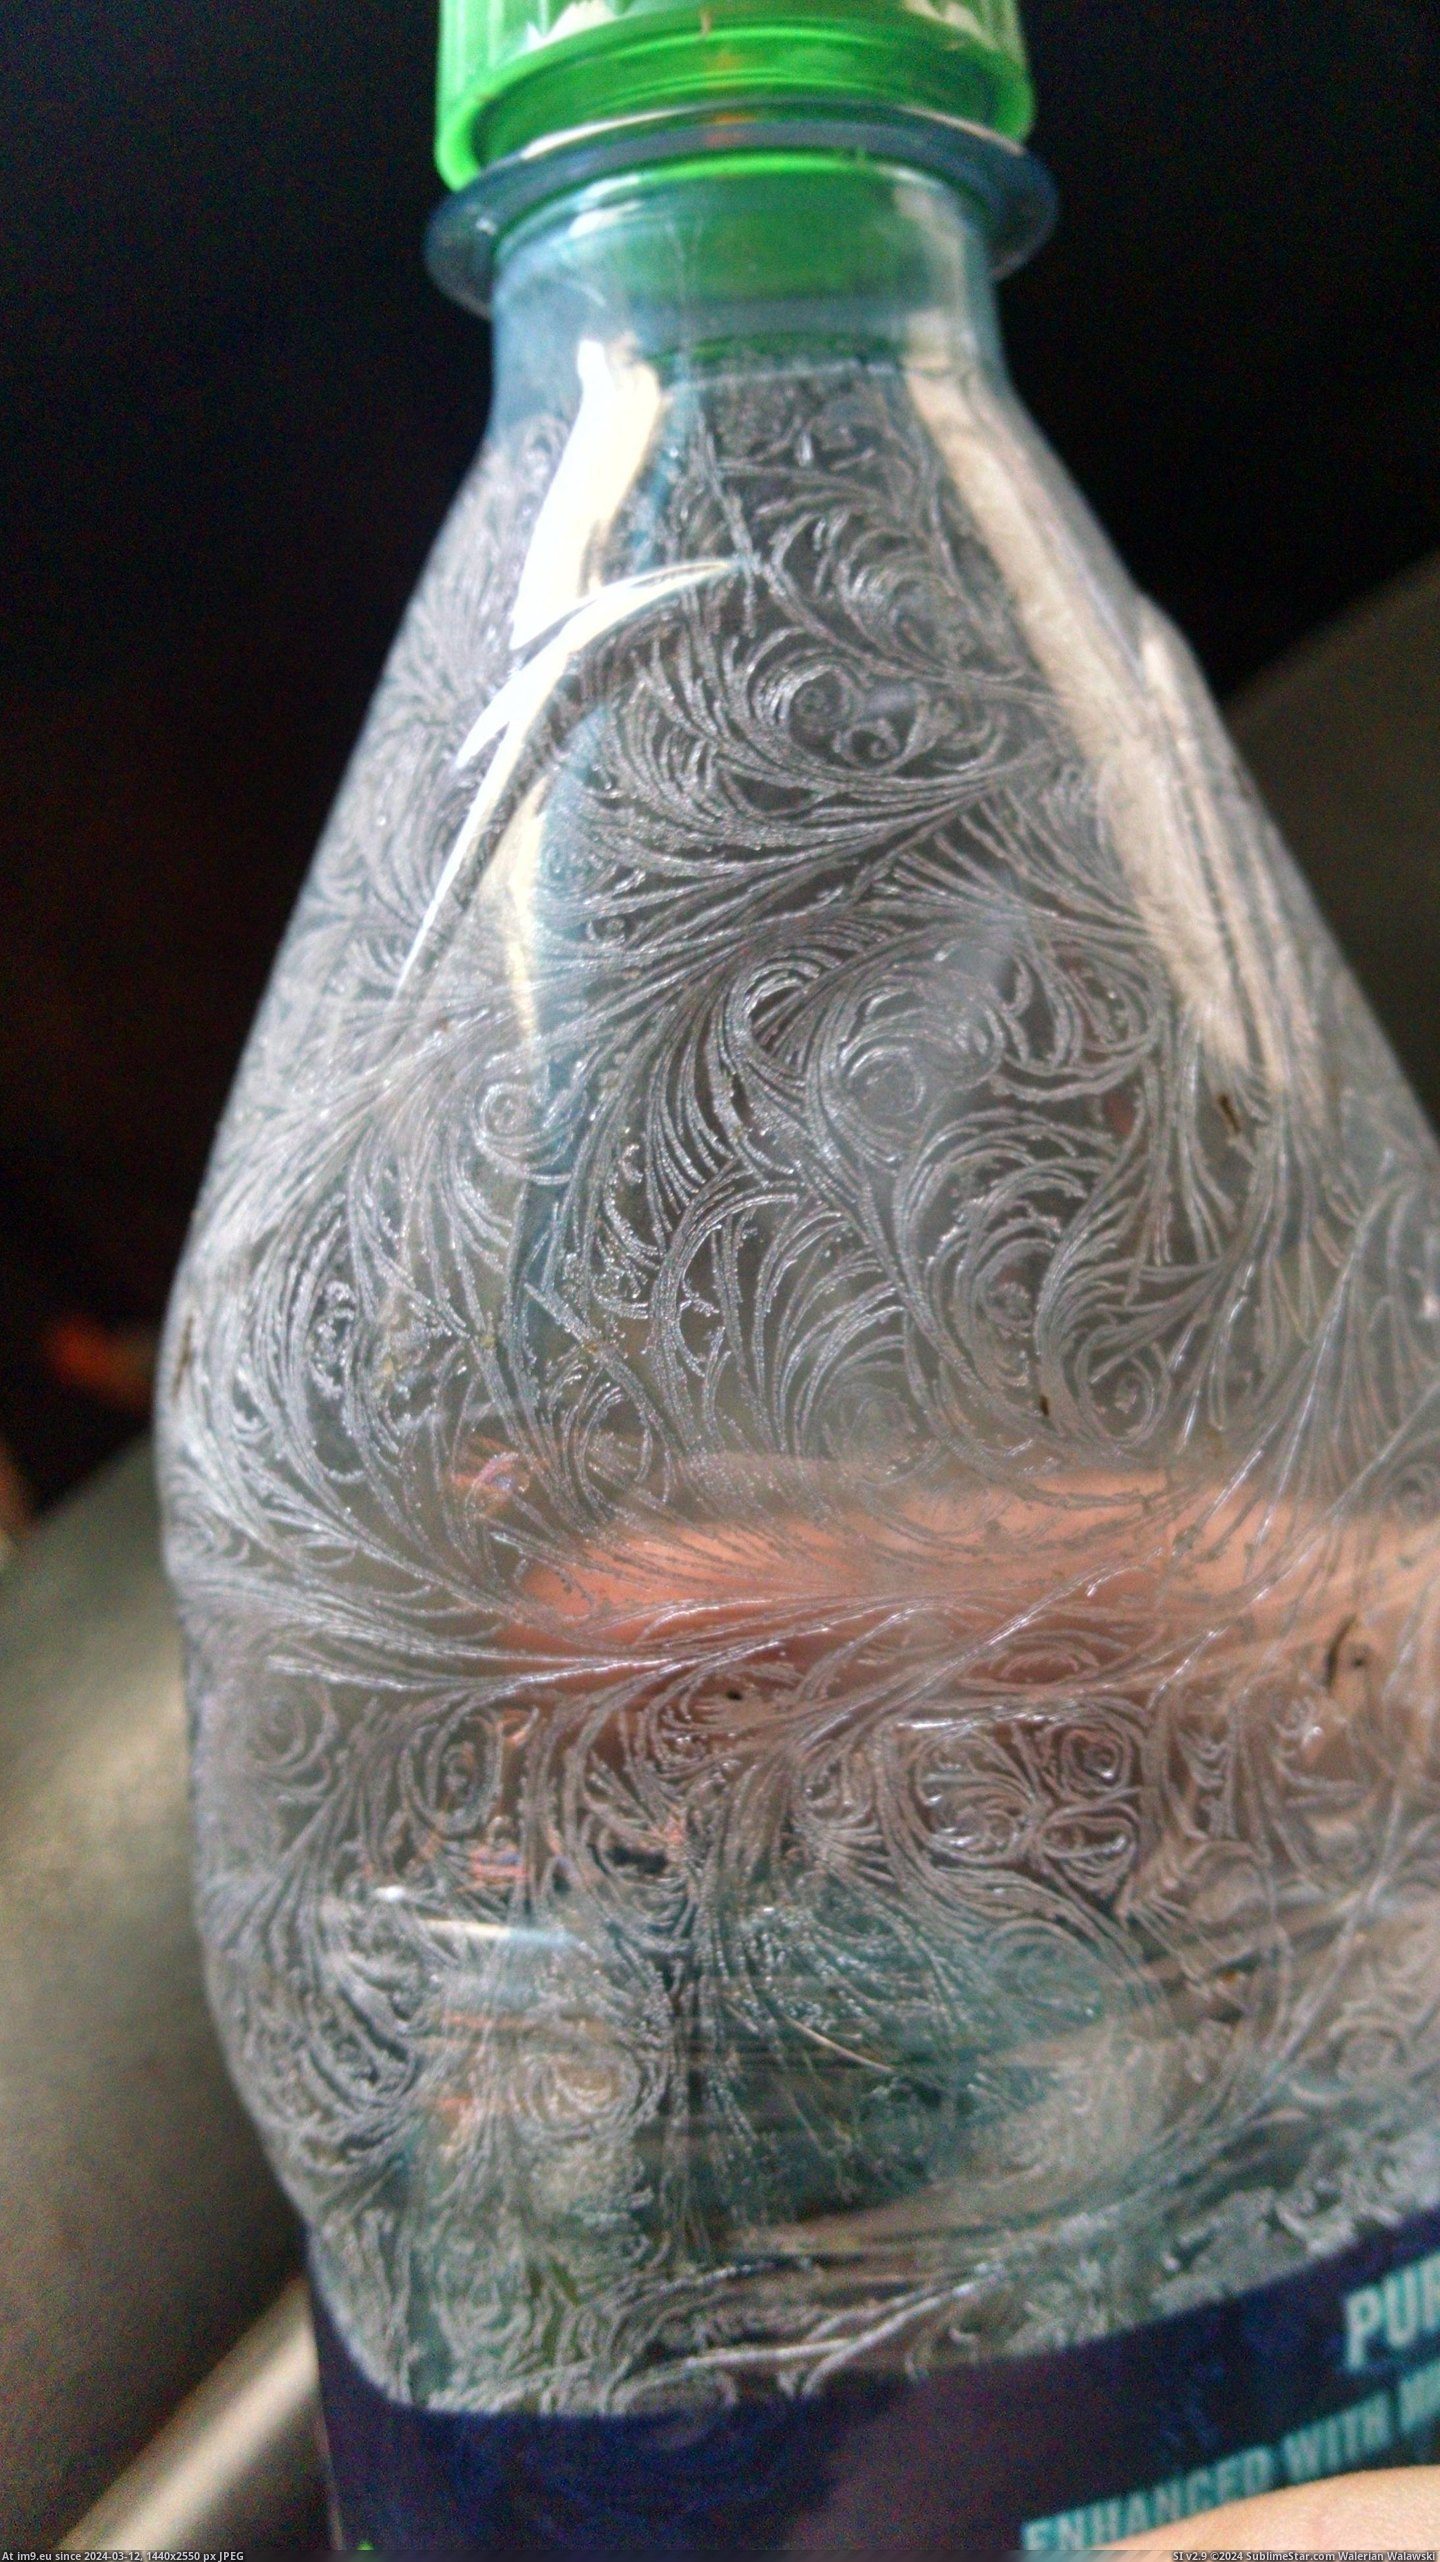 #Design #Night #Water #Bottle #Truck #Left #Ice #Natural [Pics] I left a water bottle in my truck over night this is the natural ice design on the inside Pic. (Bild von album My r/PICS favs))